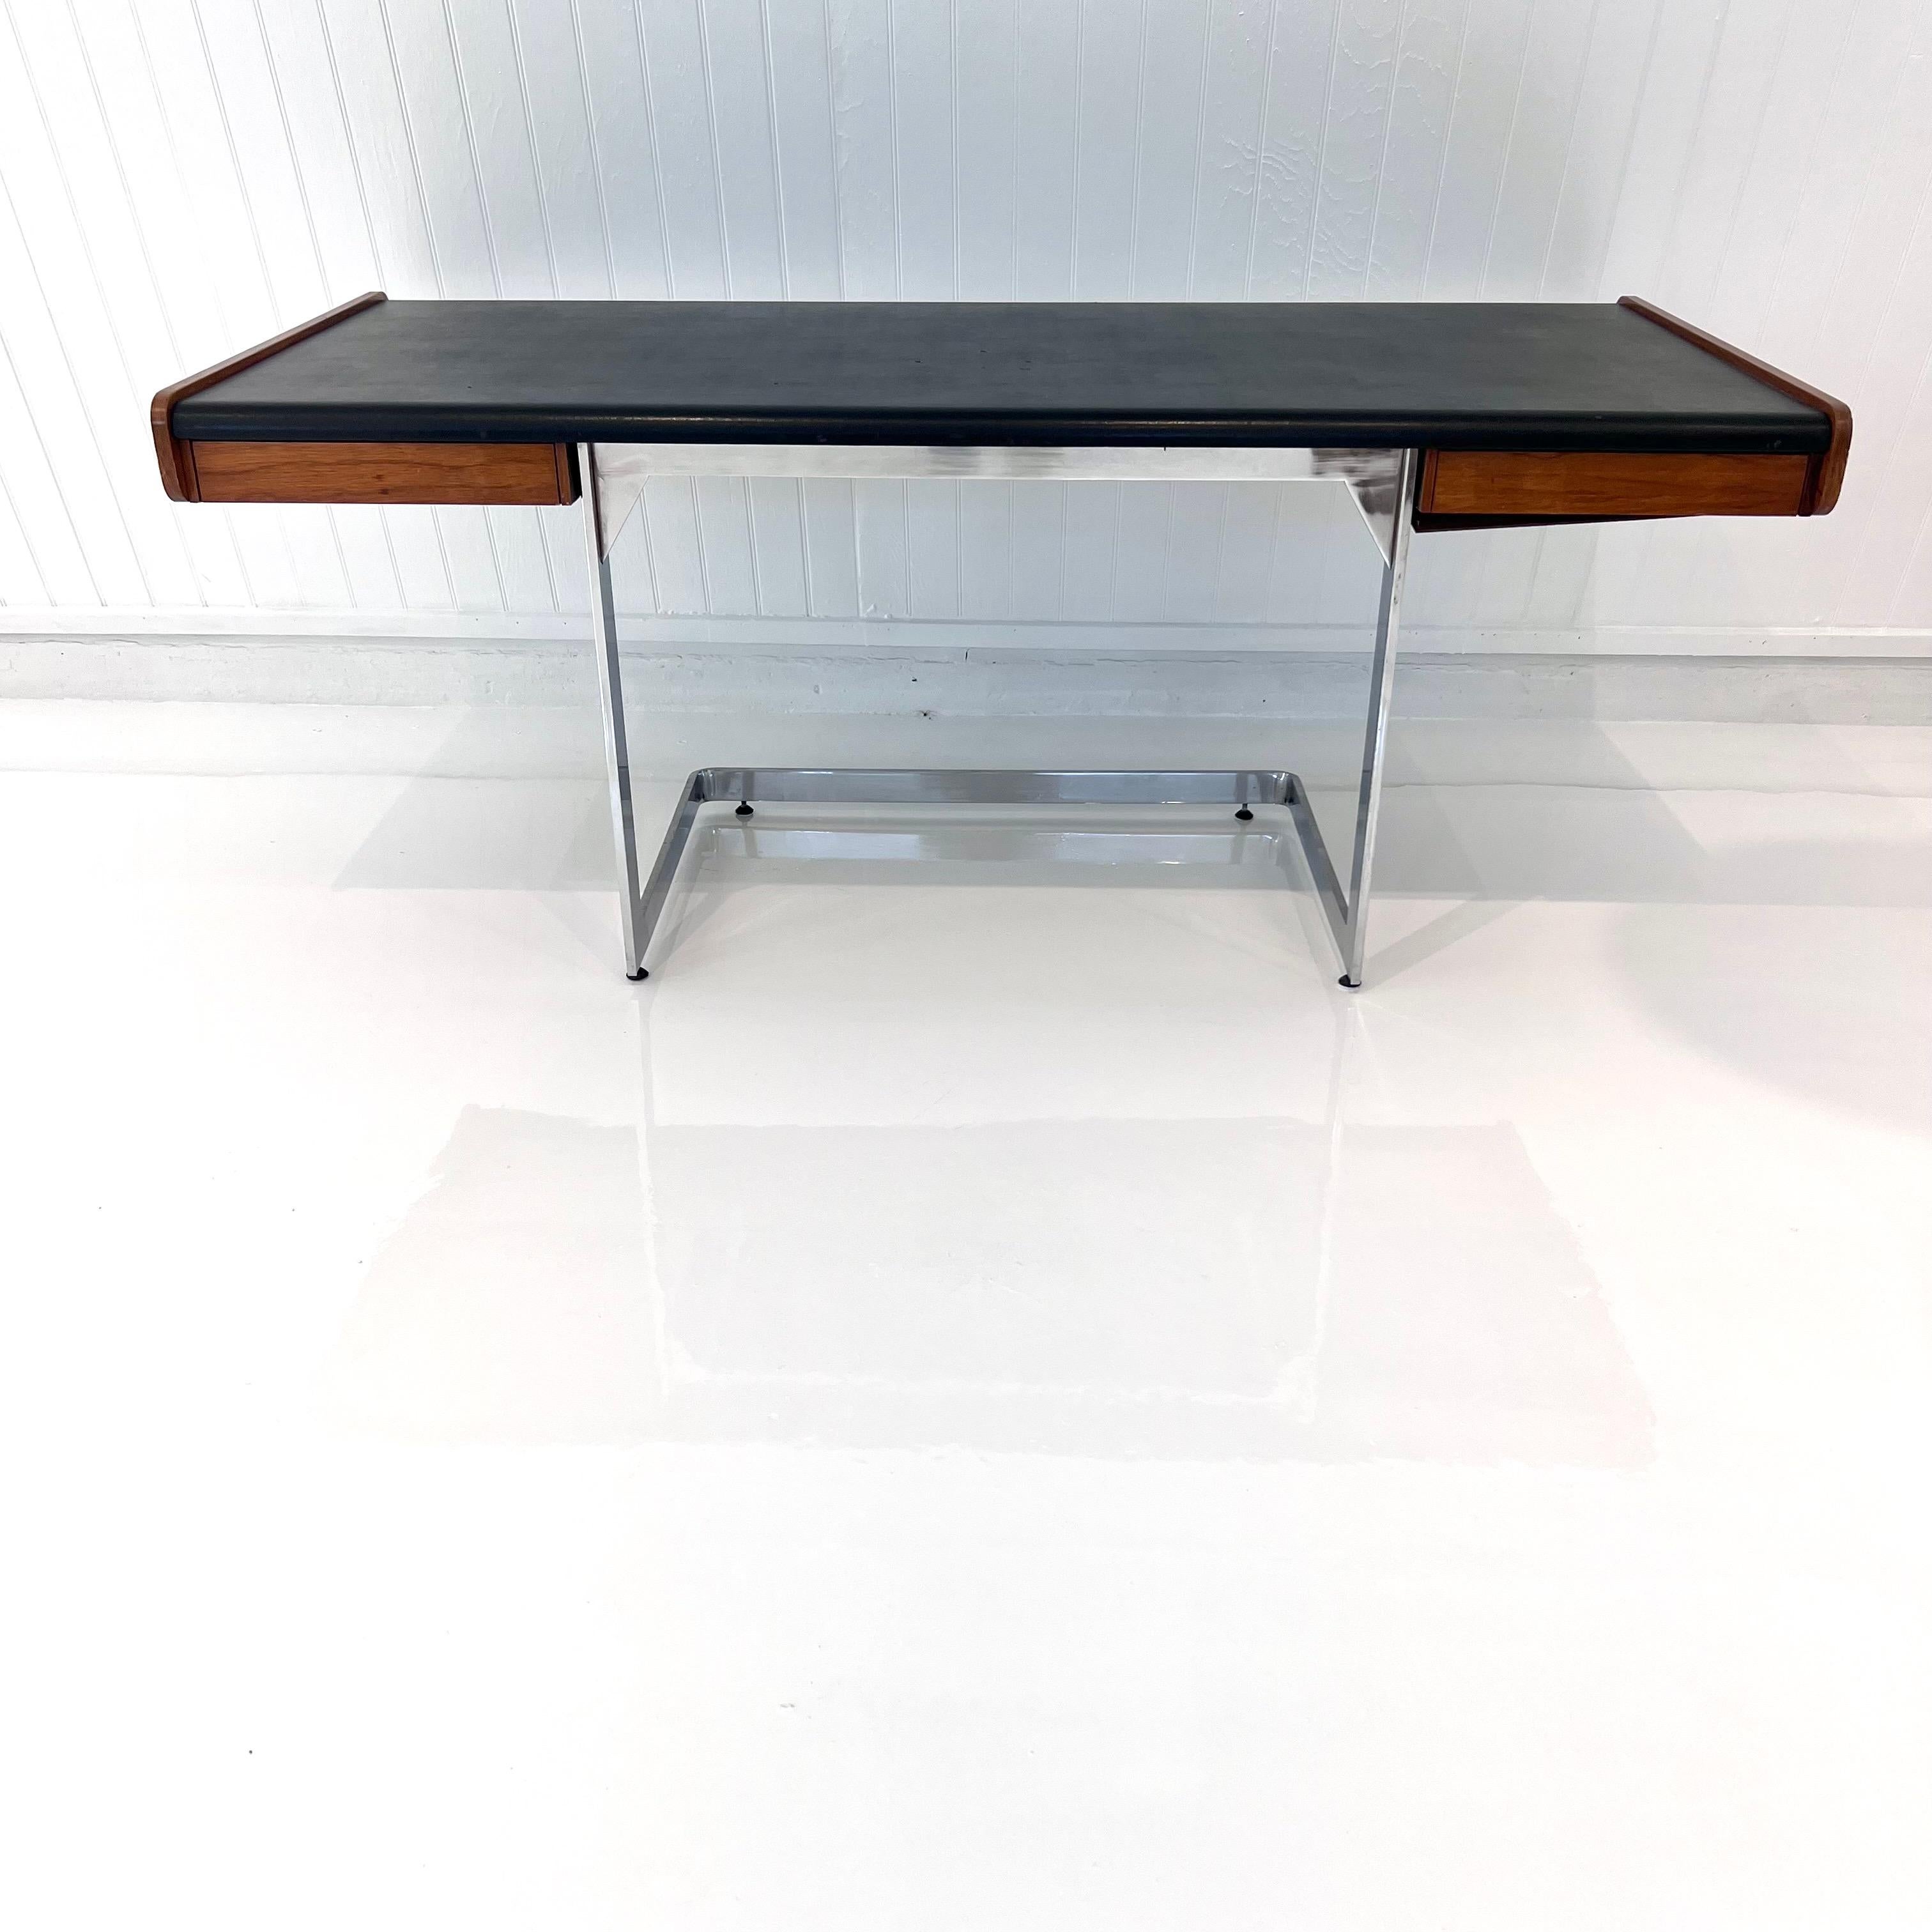 Stunning desk by Ste. Marie & Laurent made in the 1970s, Canada. Floating Rosewood and vinyl desk with angular chrome base. One-drawer flanks each side of the desk. Black vinyl top and wood in good condition with some wear as shown. Elegant lines